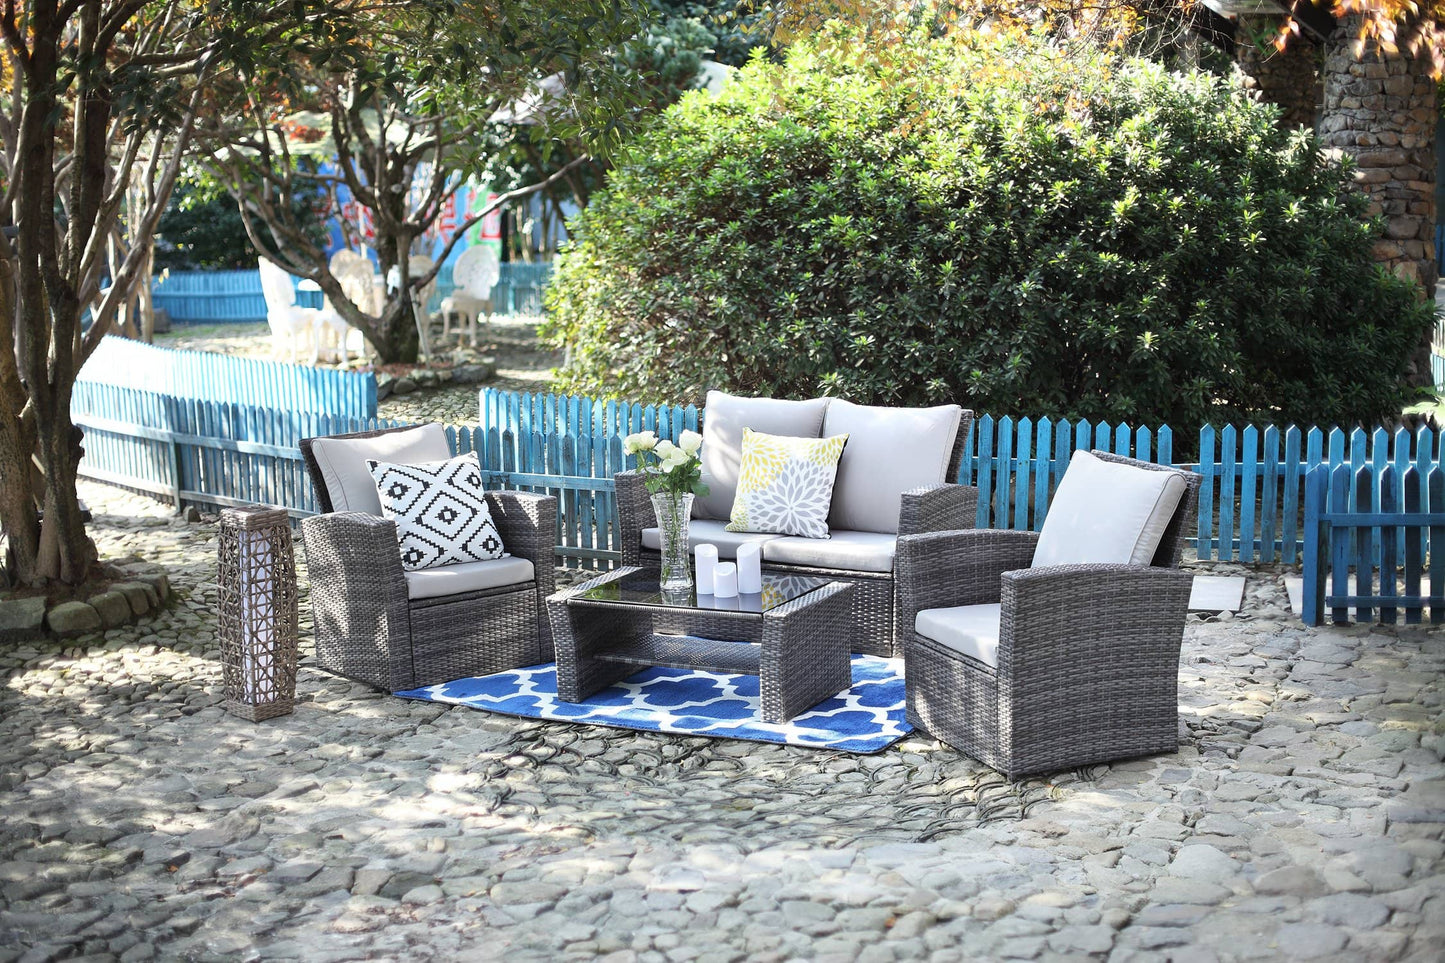 Context Vista 4 Piece All Weather Wicker Sofa Seating Group with Cushions and Coffee Table